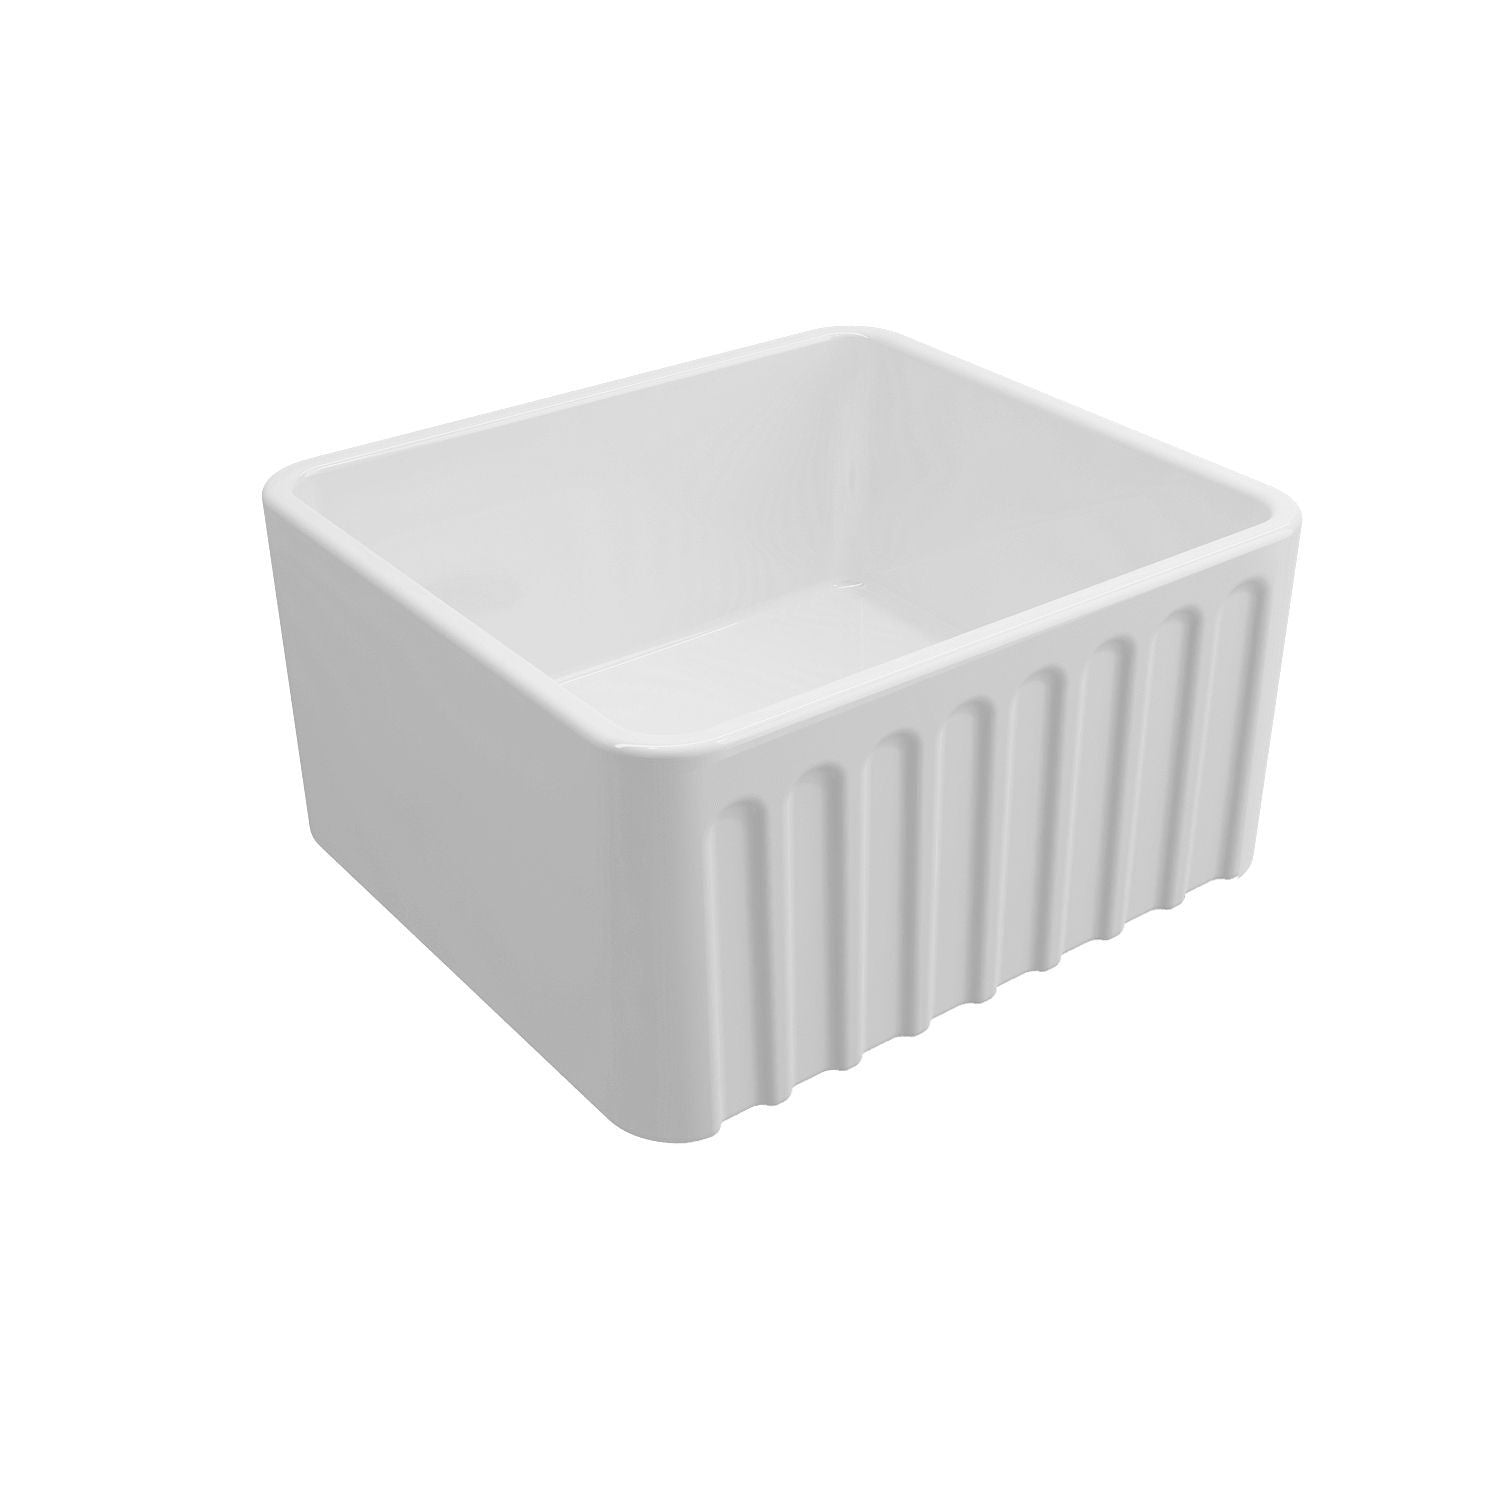 TURNER HASTINGS NOVI RIBBED FARMHOUSE BUTLER SINK WITH OVERFLOW GLOSS WHITE 500MM